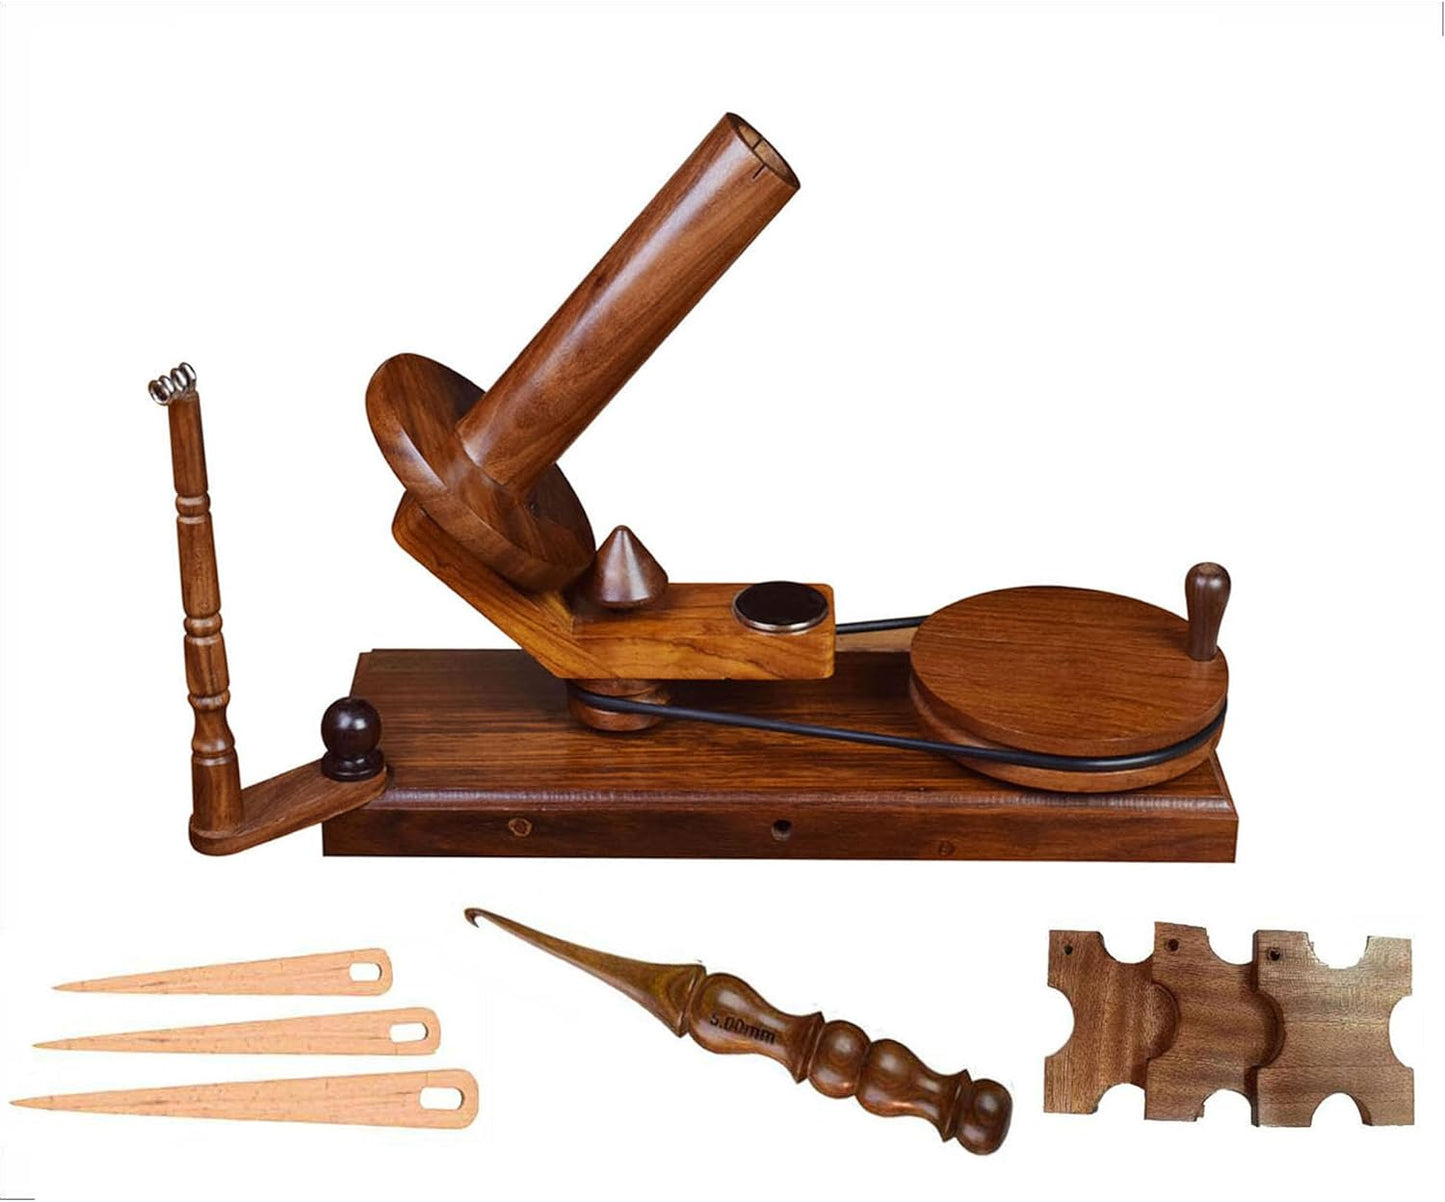 𝐋𝐚𝐫𝐠𝐞 𝐂𝐚𝐩𝐚𝐜𝐢𝐭𝐲 𝐘𝐚𝐫𝐧 𝐖𝐢𝐧𝐝𝐞𝐫 - Hand Operated Wooden Yarn Ball Winder. Support 10 to 12 Oz of Yarn Fiber Wool String with Free Crochet Hook (7PCS Rosewood Winder)